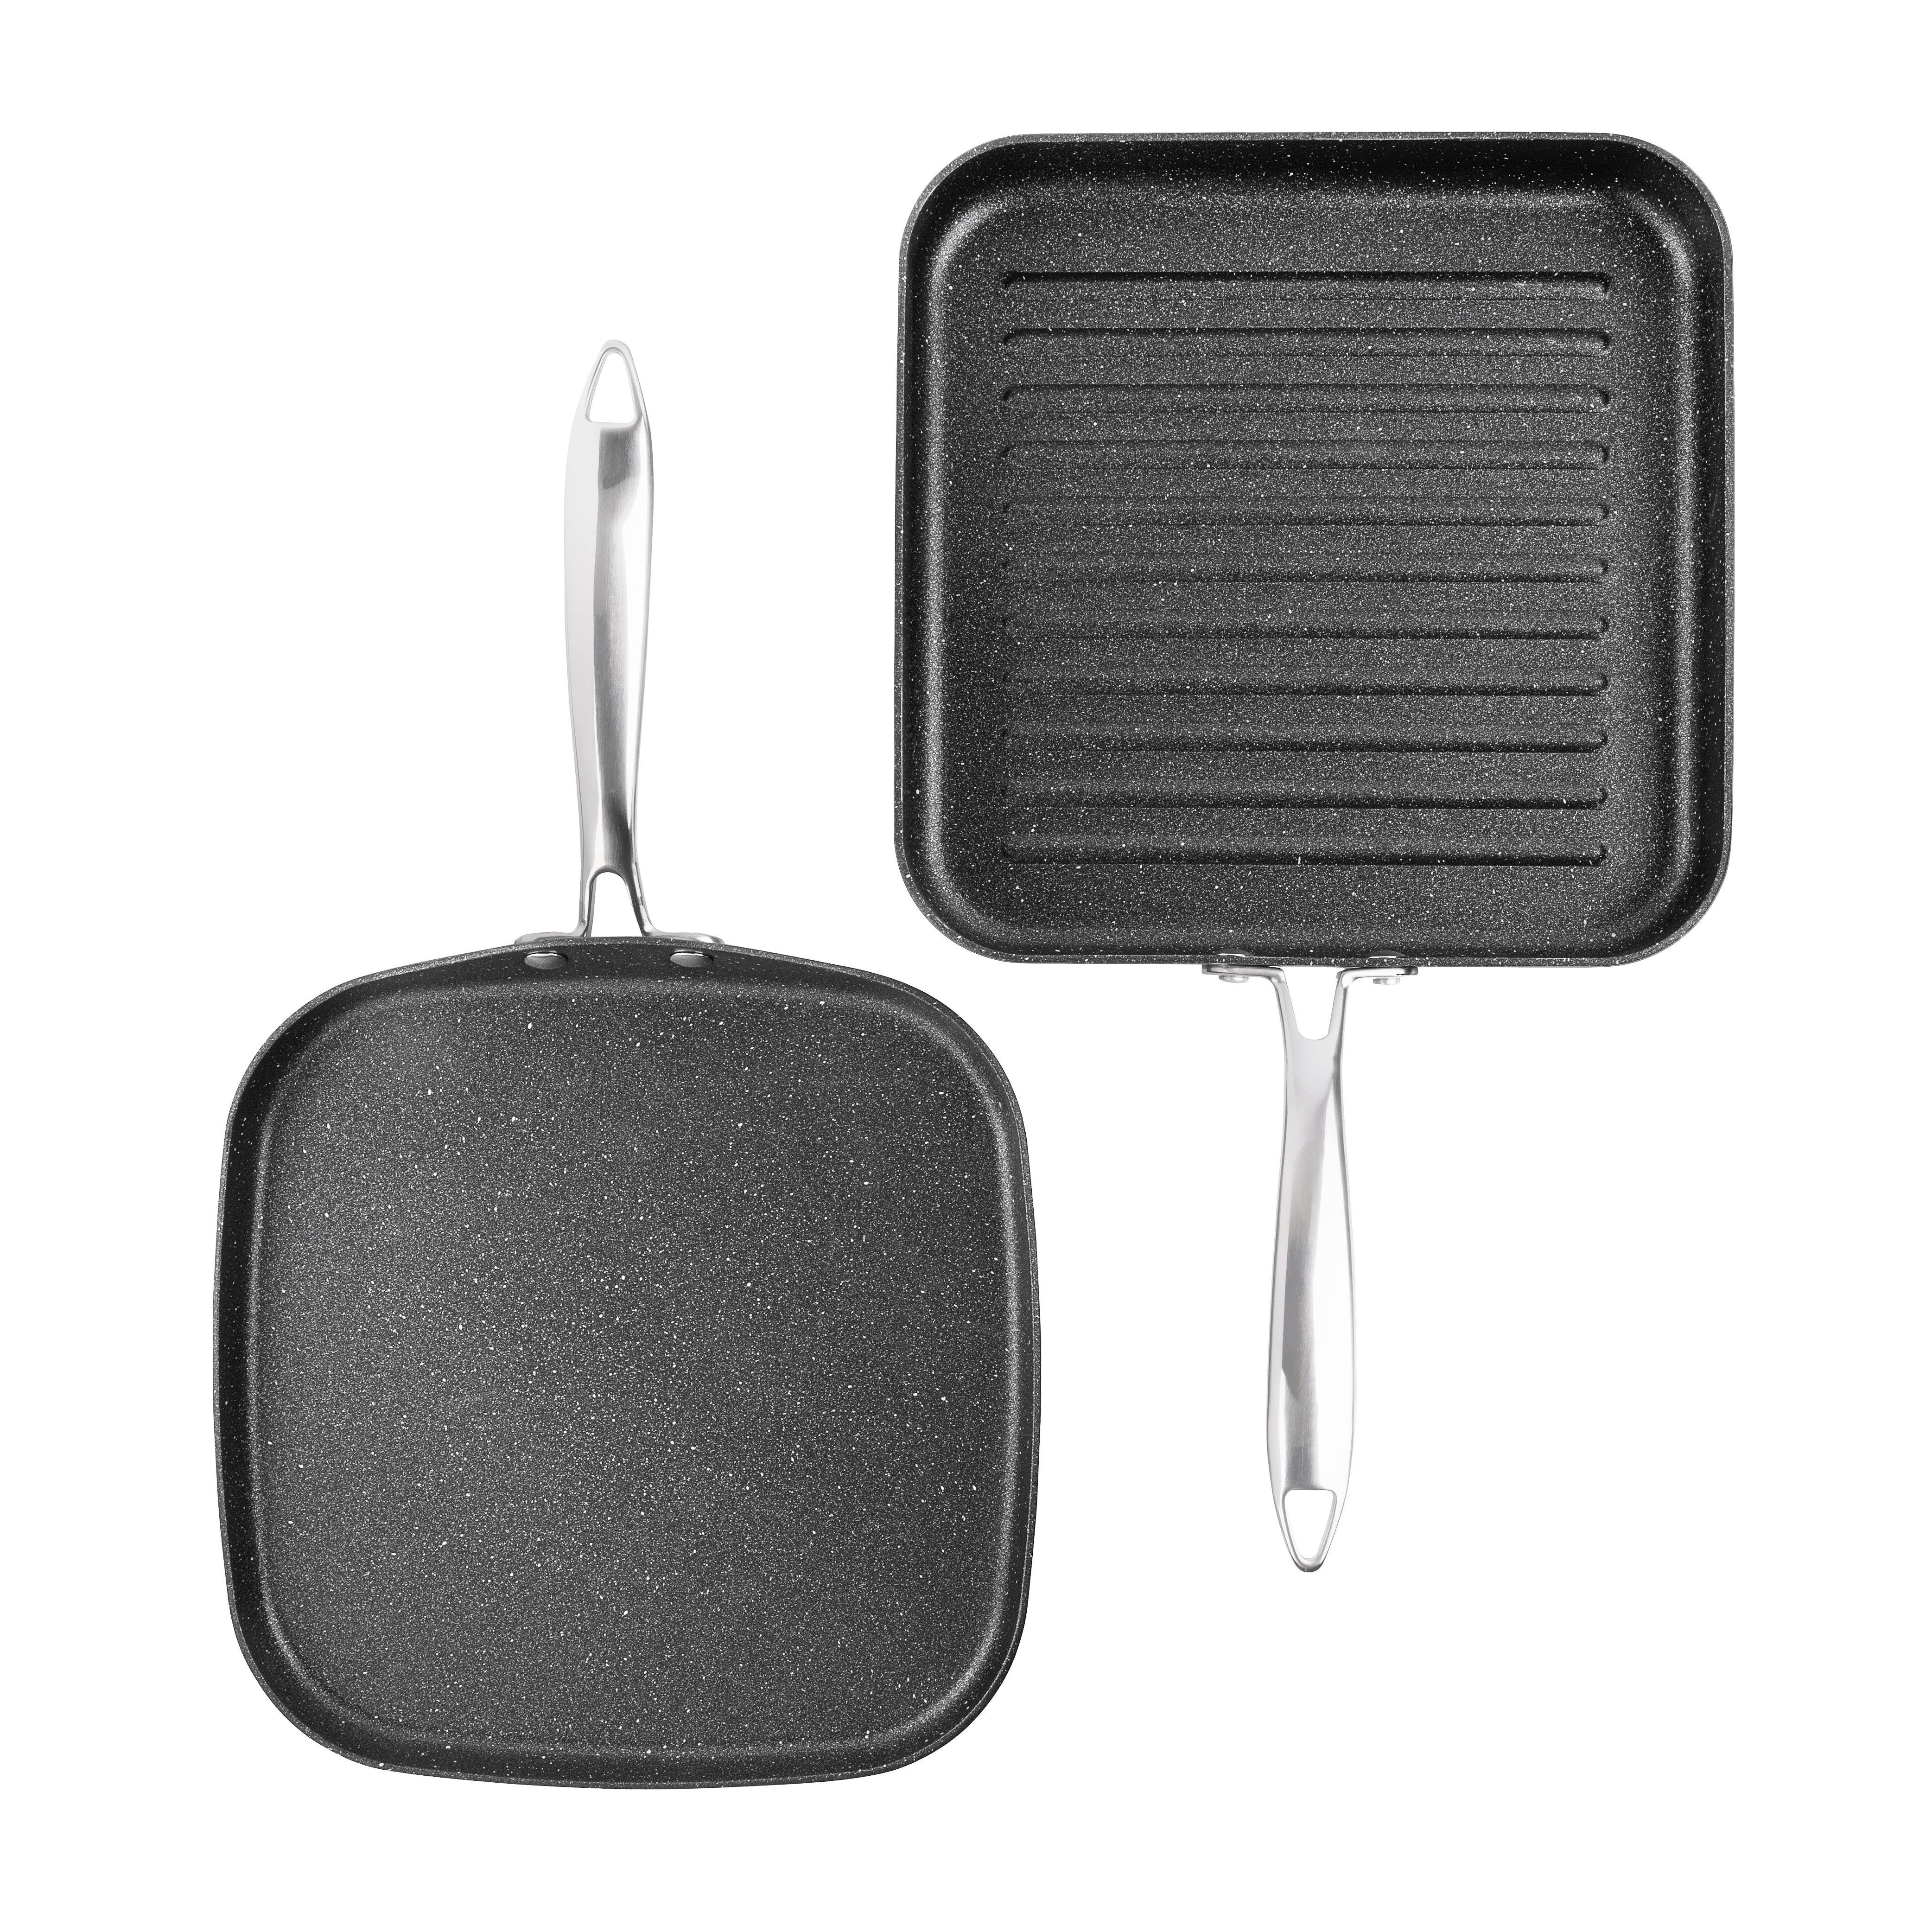 Granitestone 2 Pack Nonstick 10.5” Grill Pan/Flat Griddle Pan for Stovetop  with 3x Coated Surface